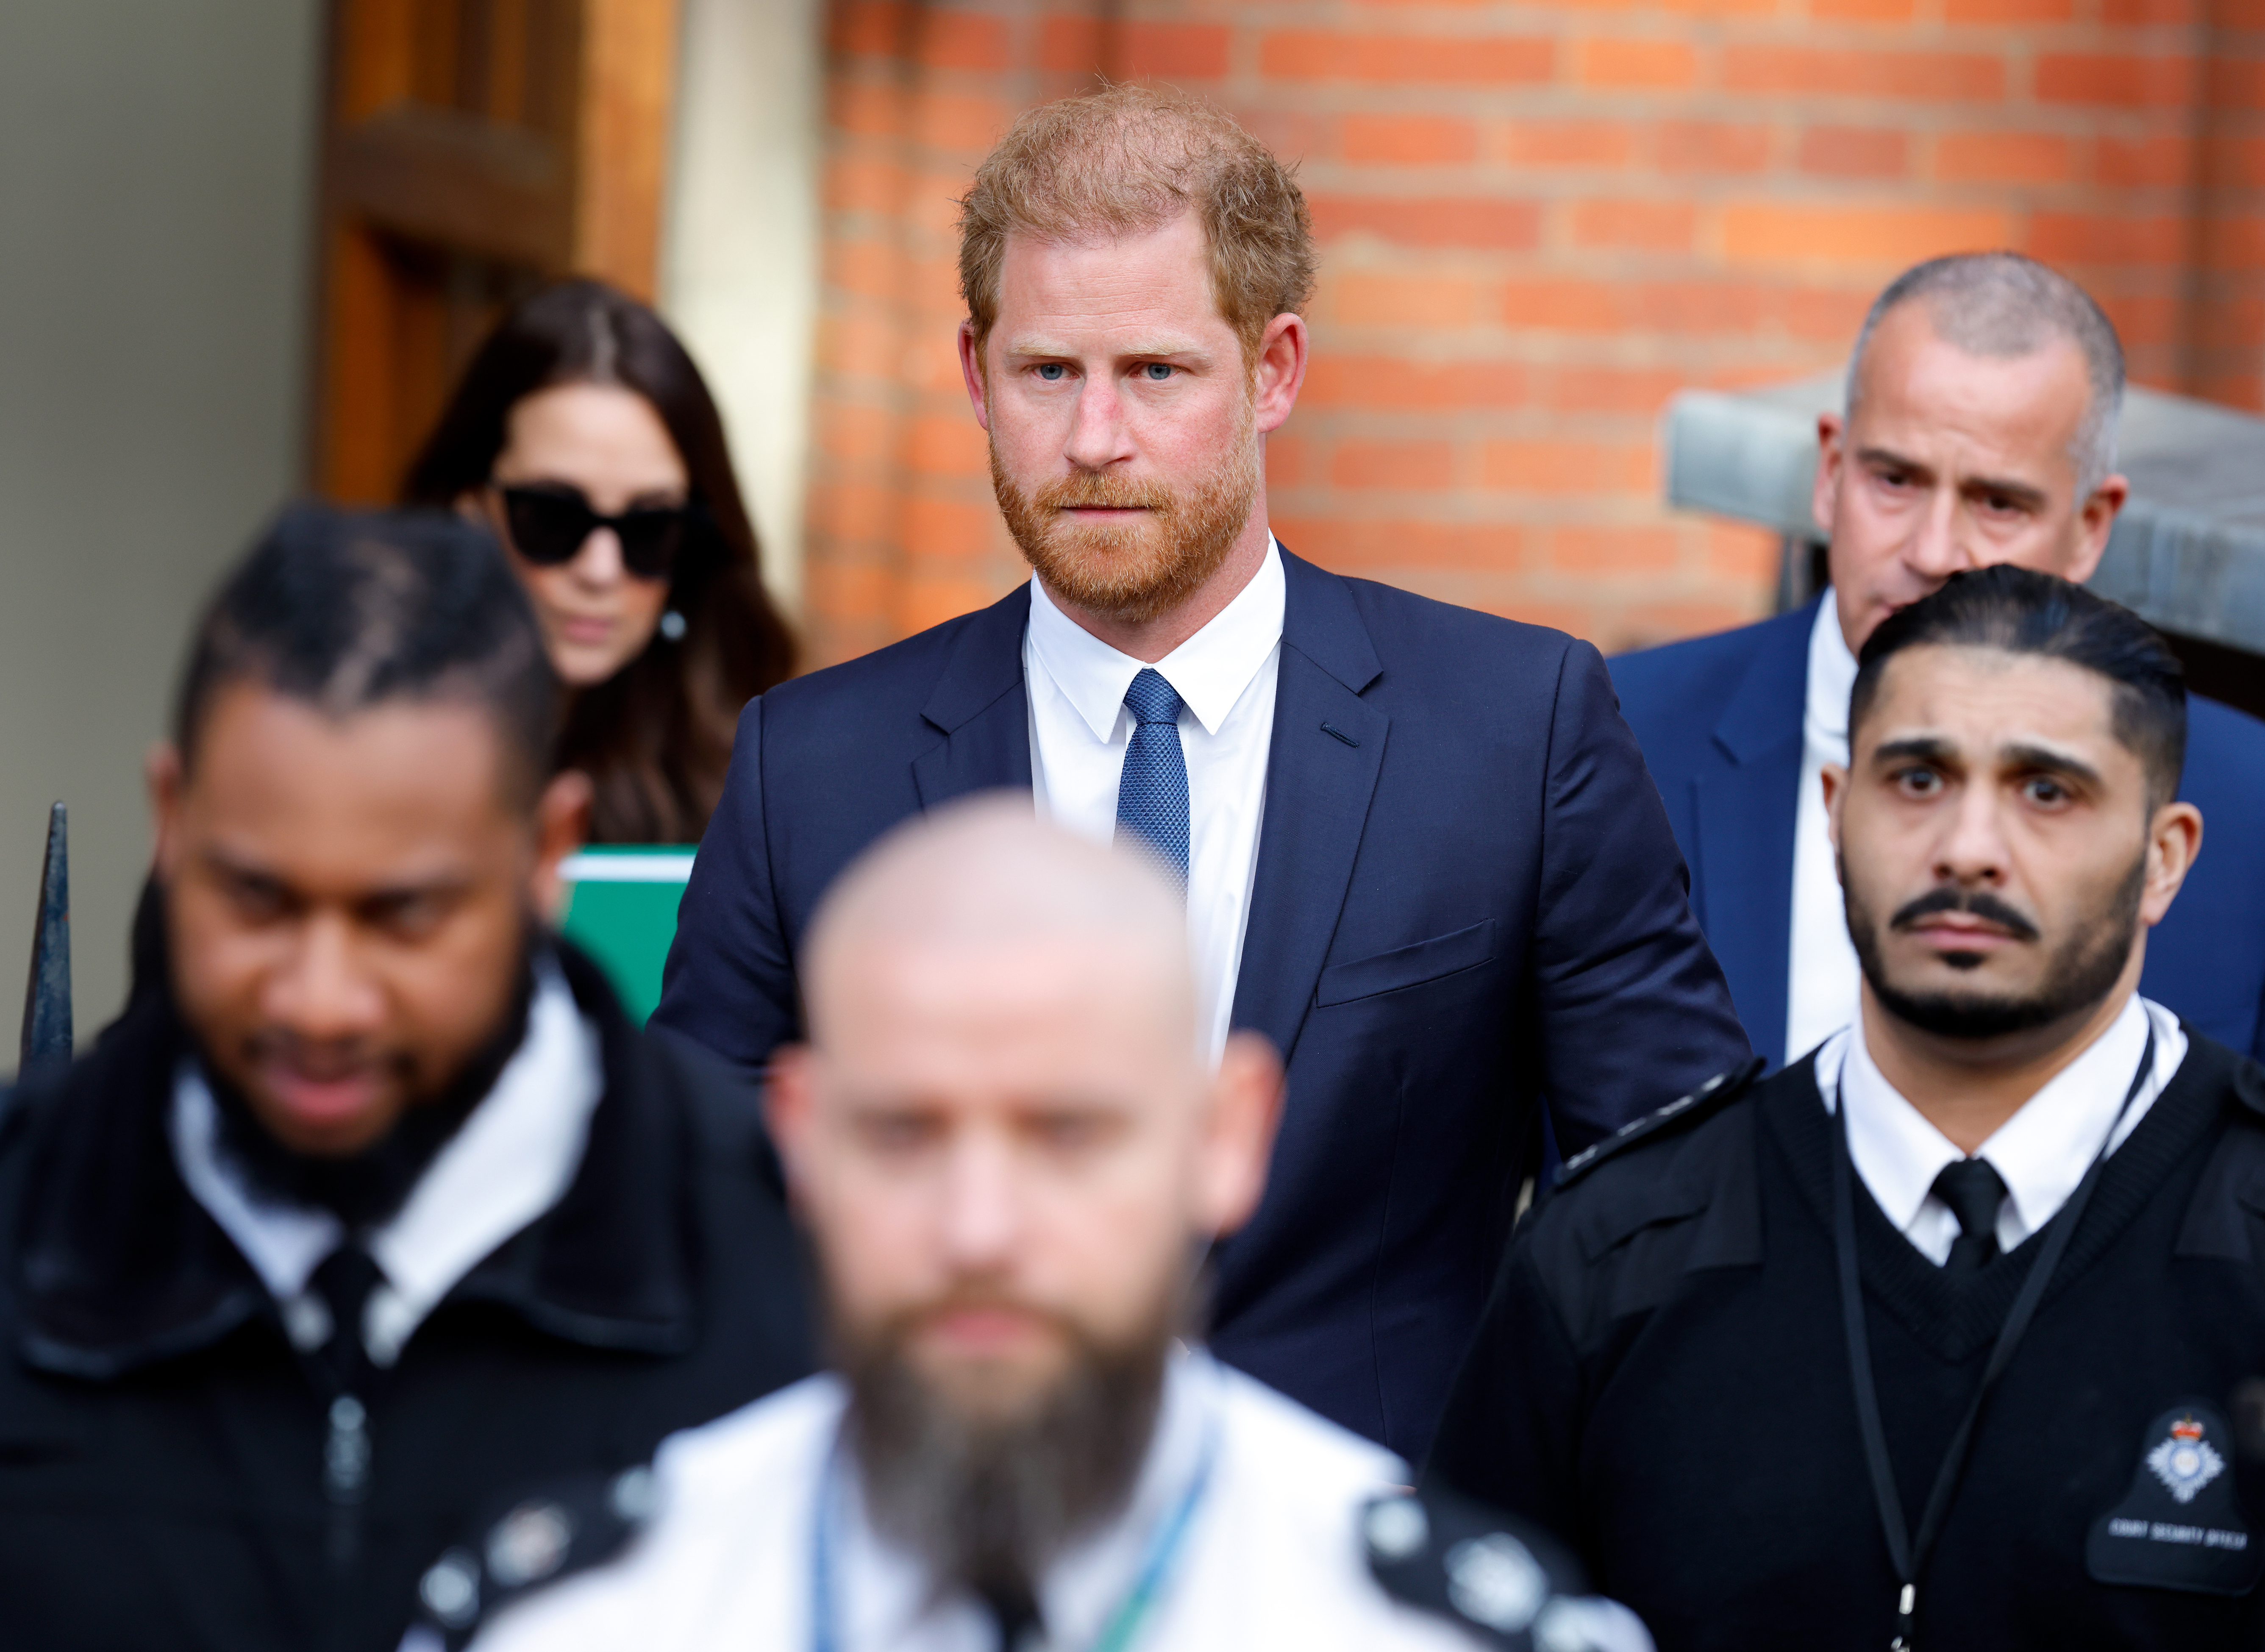 Prince Harry leaving the Royal Courts of Justice in London, England on March 27, 2023 | Source: Getty Images